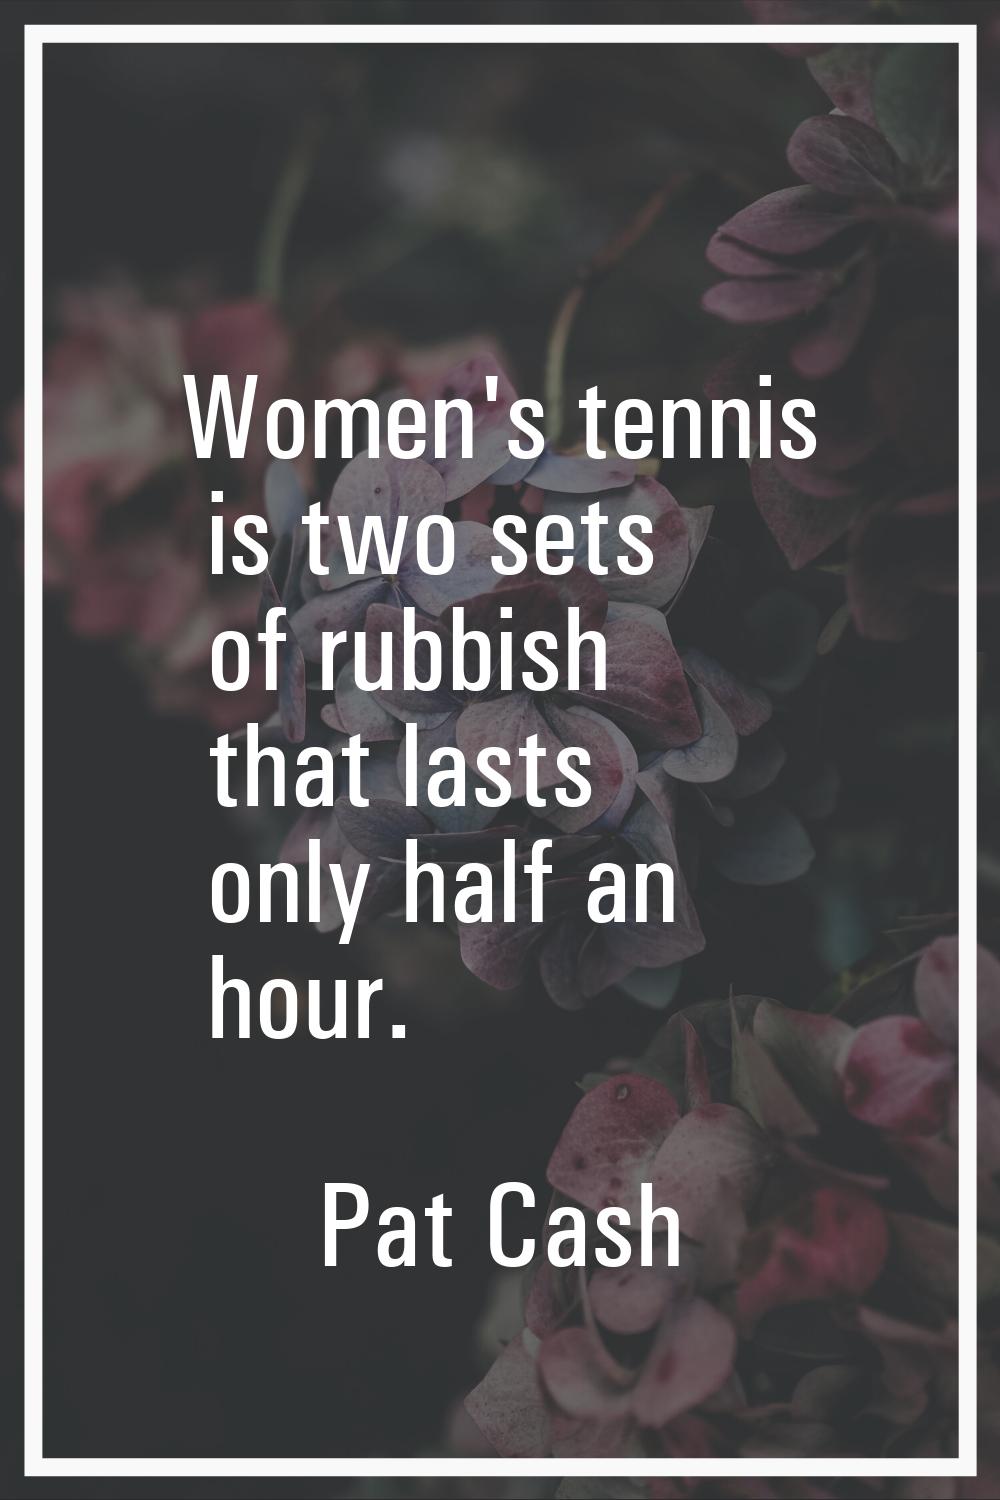 Women's tennis is two sets of rubbish that lasts only half an hour.